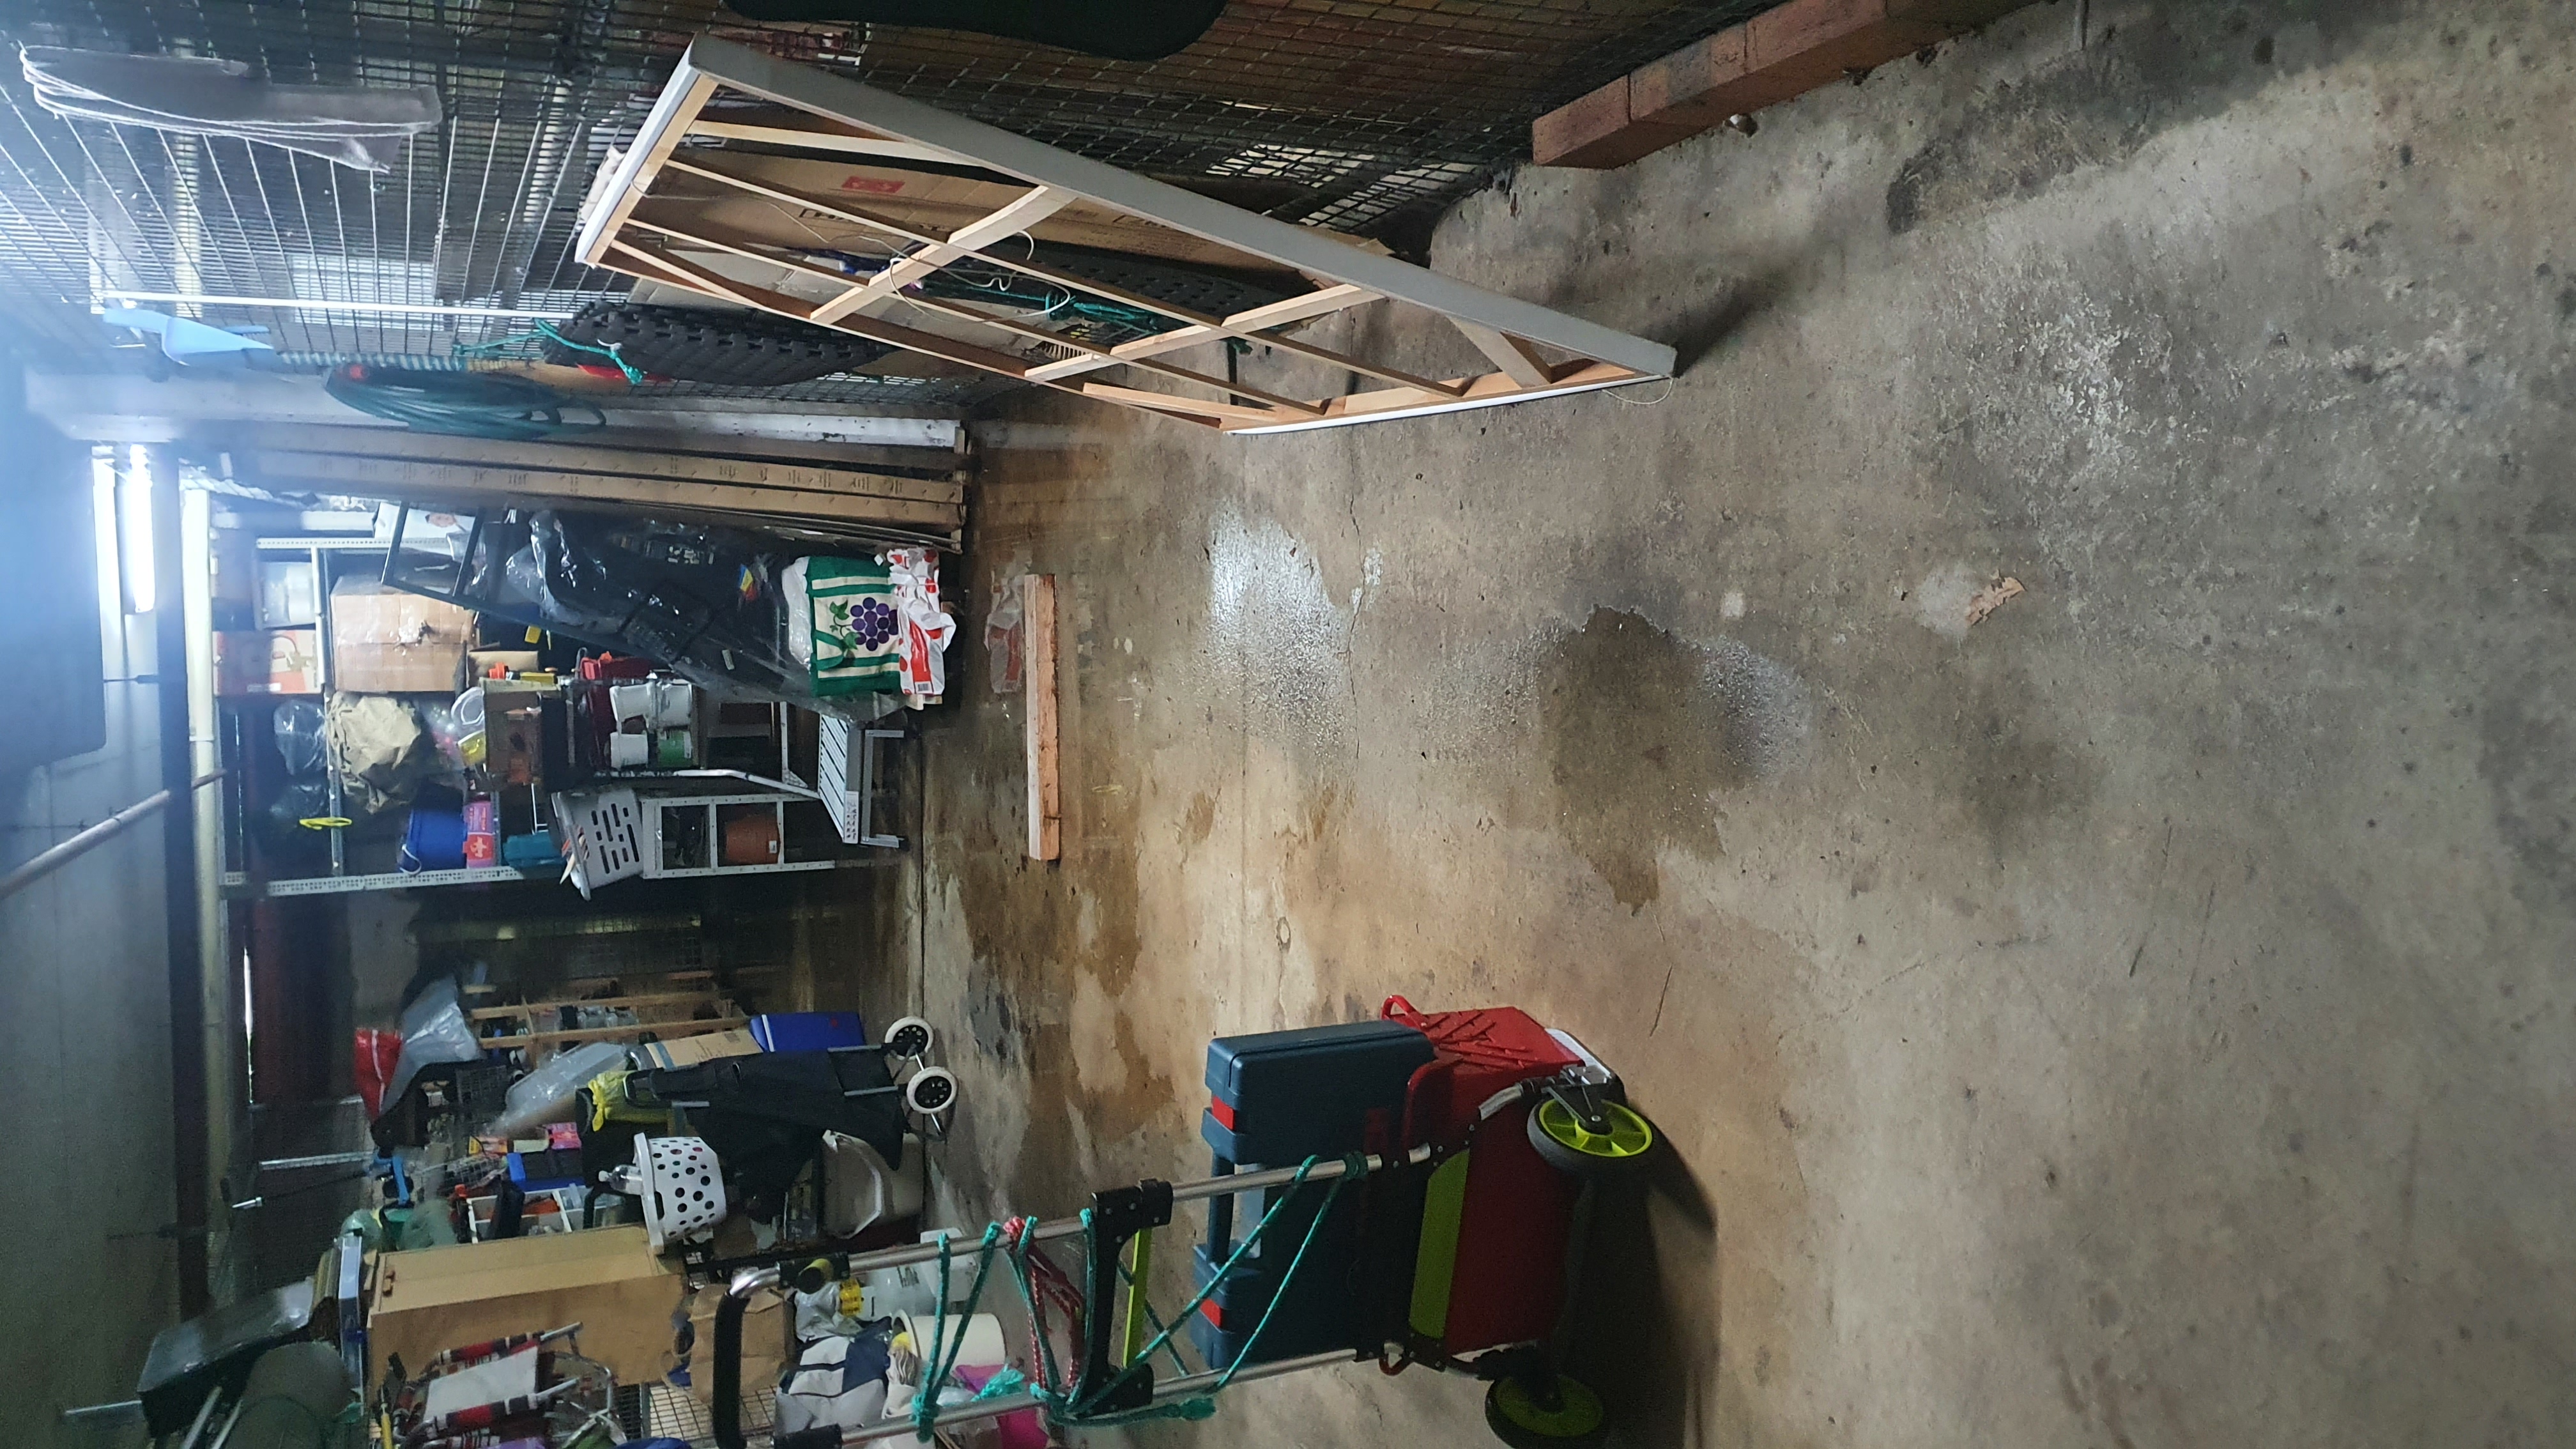 SP52948-examples-of-serious-damages-due-to-water-leakages-in-Lot-186-garage-photo-3-1Mar2022.jpg